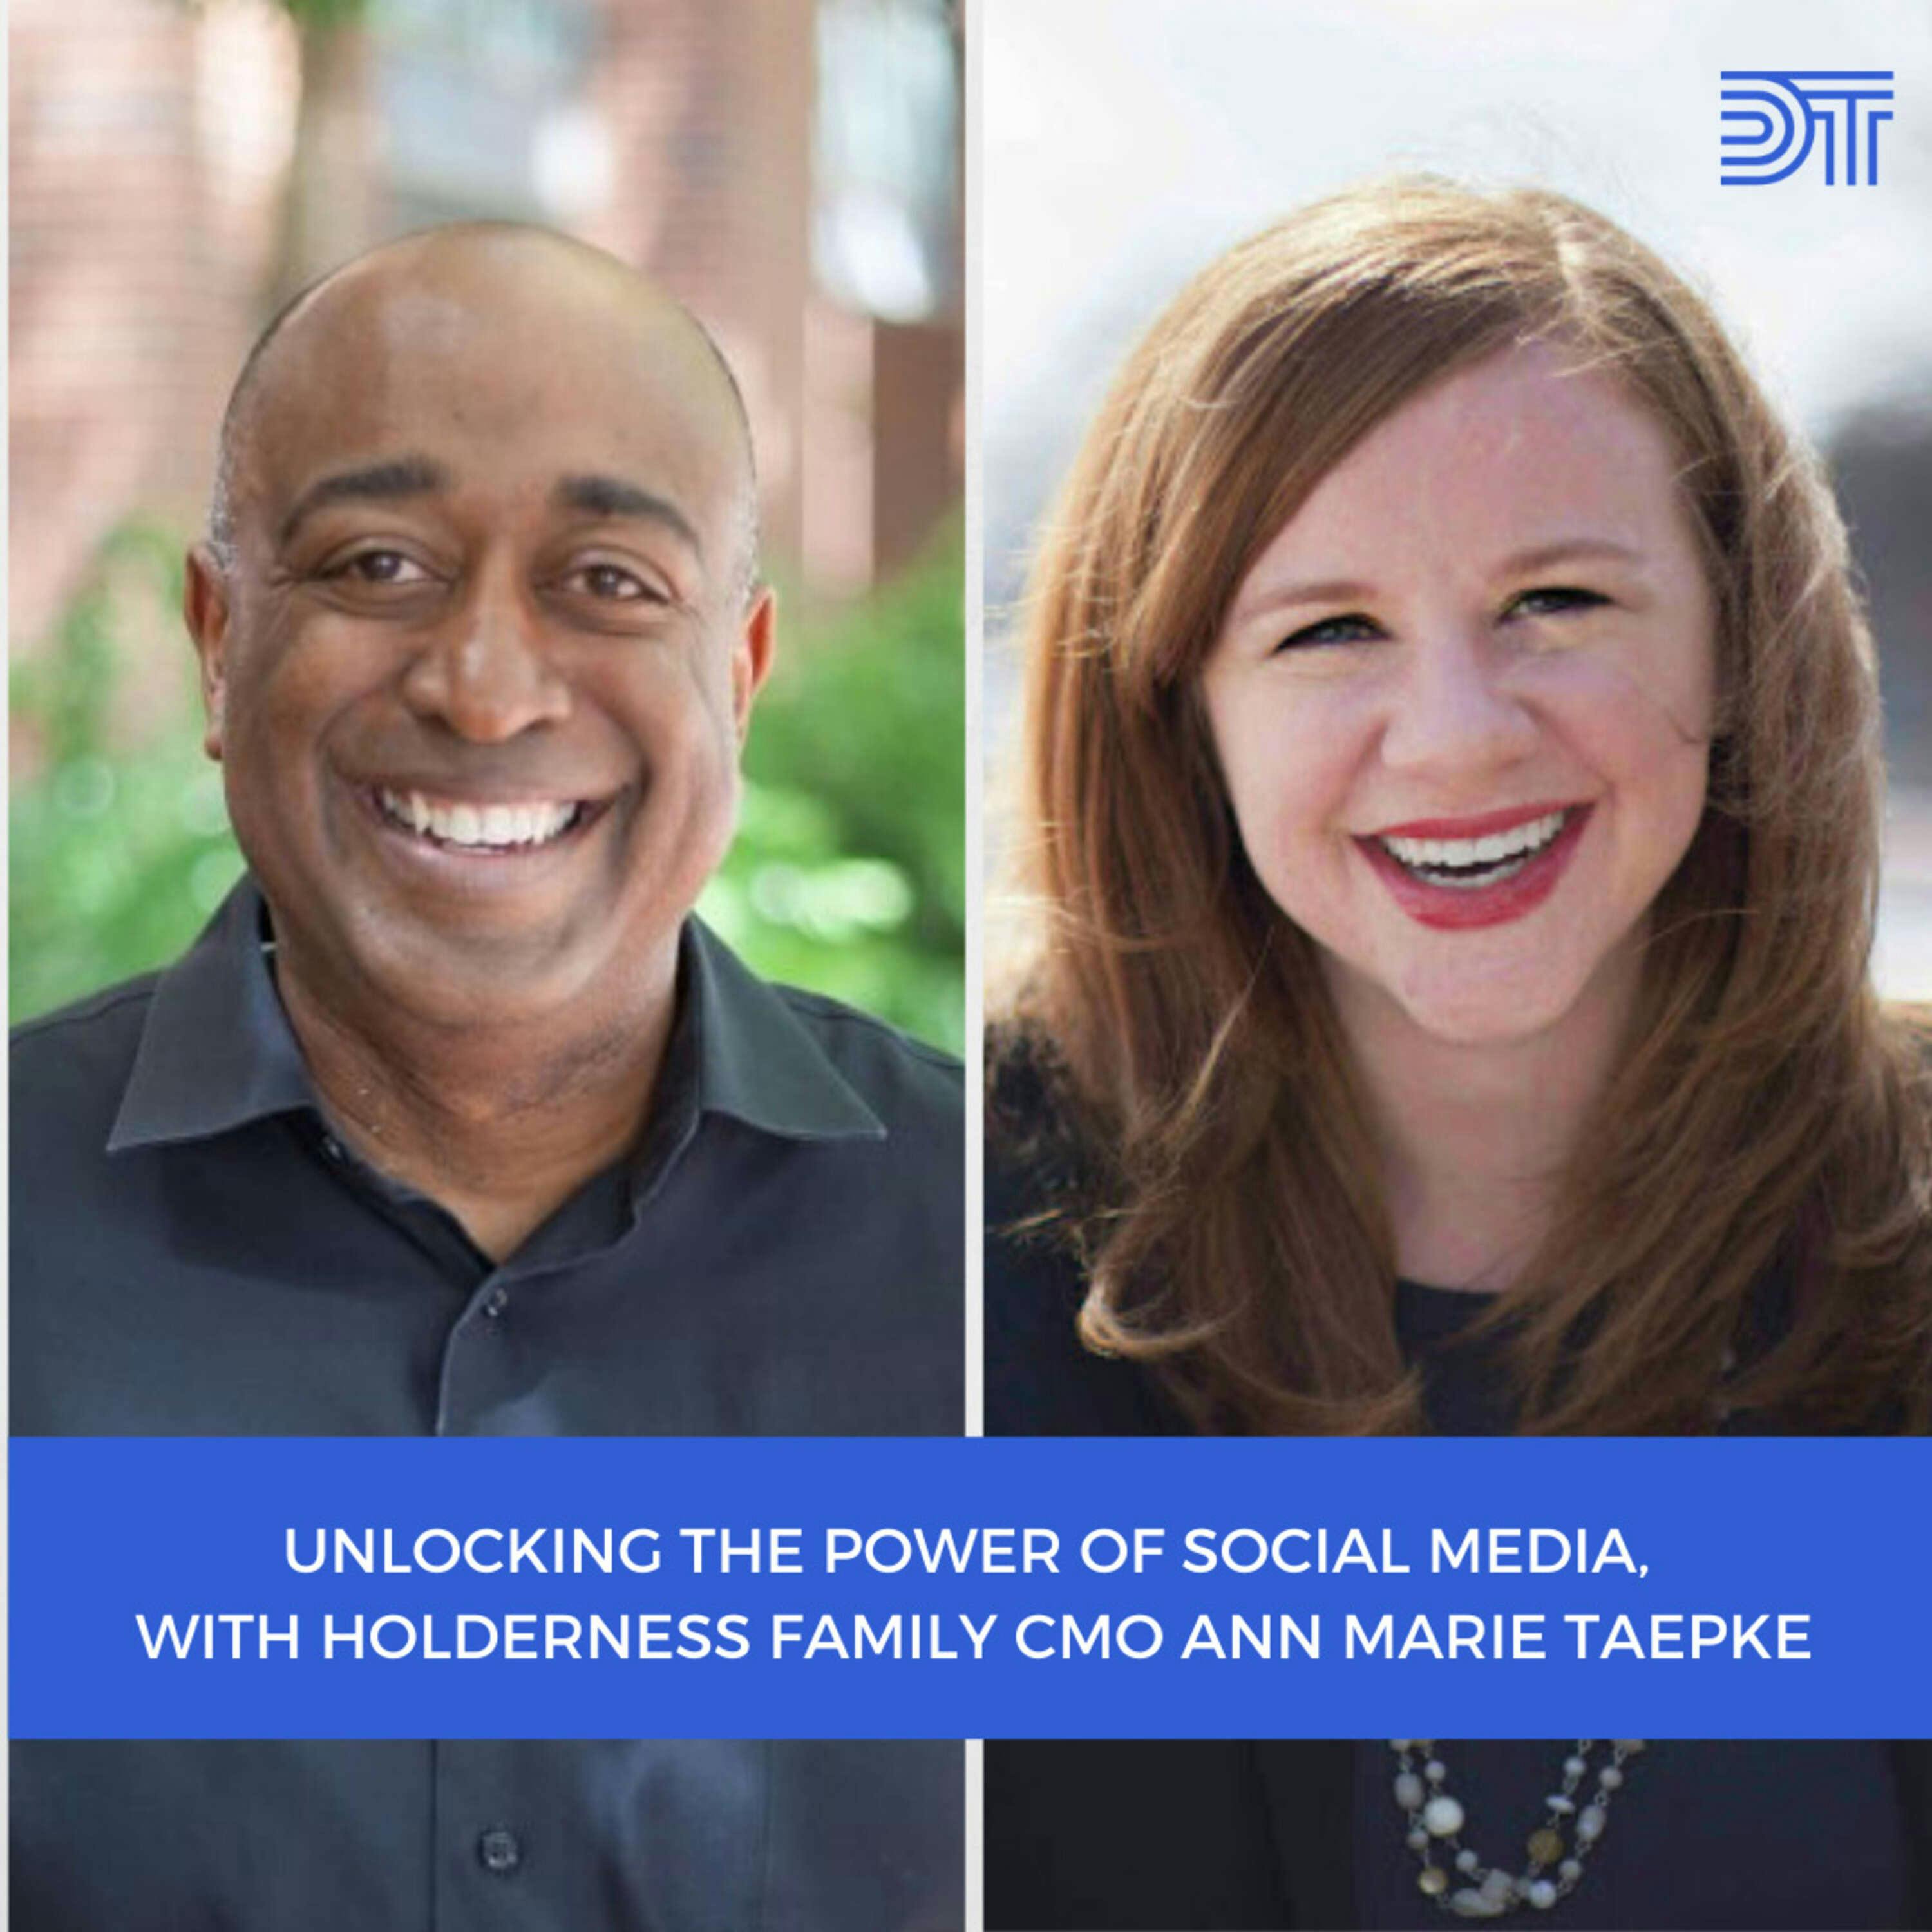 Unlocking the Power of Social Media, with Holderness Family CMO Ann Marie Taepke